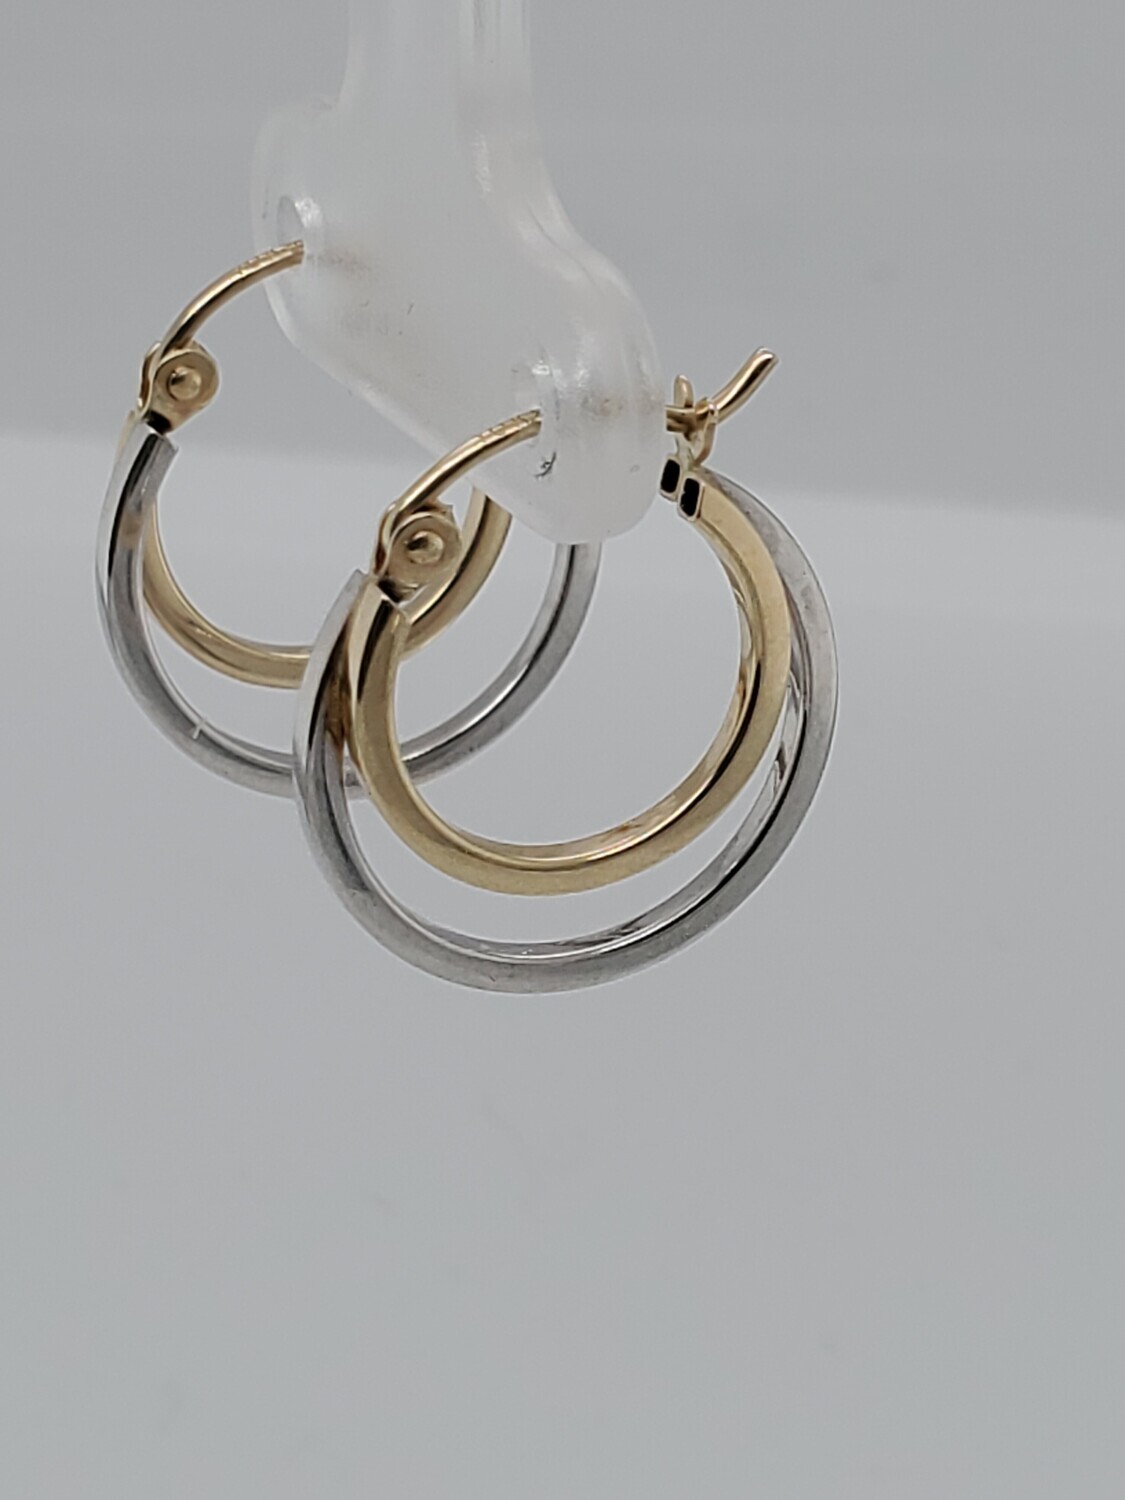 BRAND NEW!! 10KT TWO TONE DOUBLE HOOP EARRINGS  INVENTORY # I-18338 75TH AVE